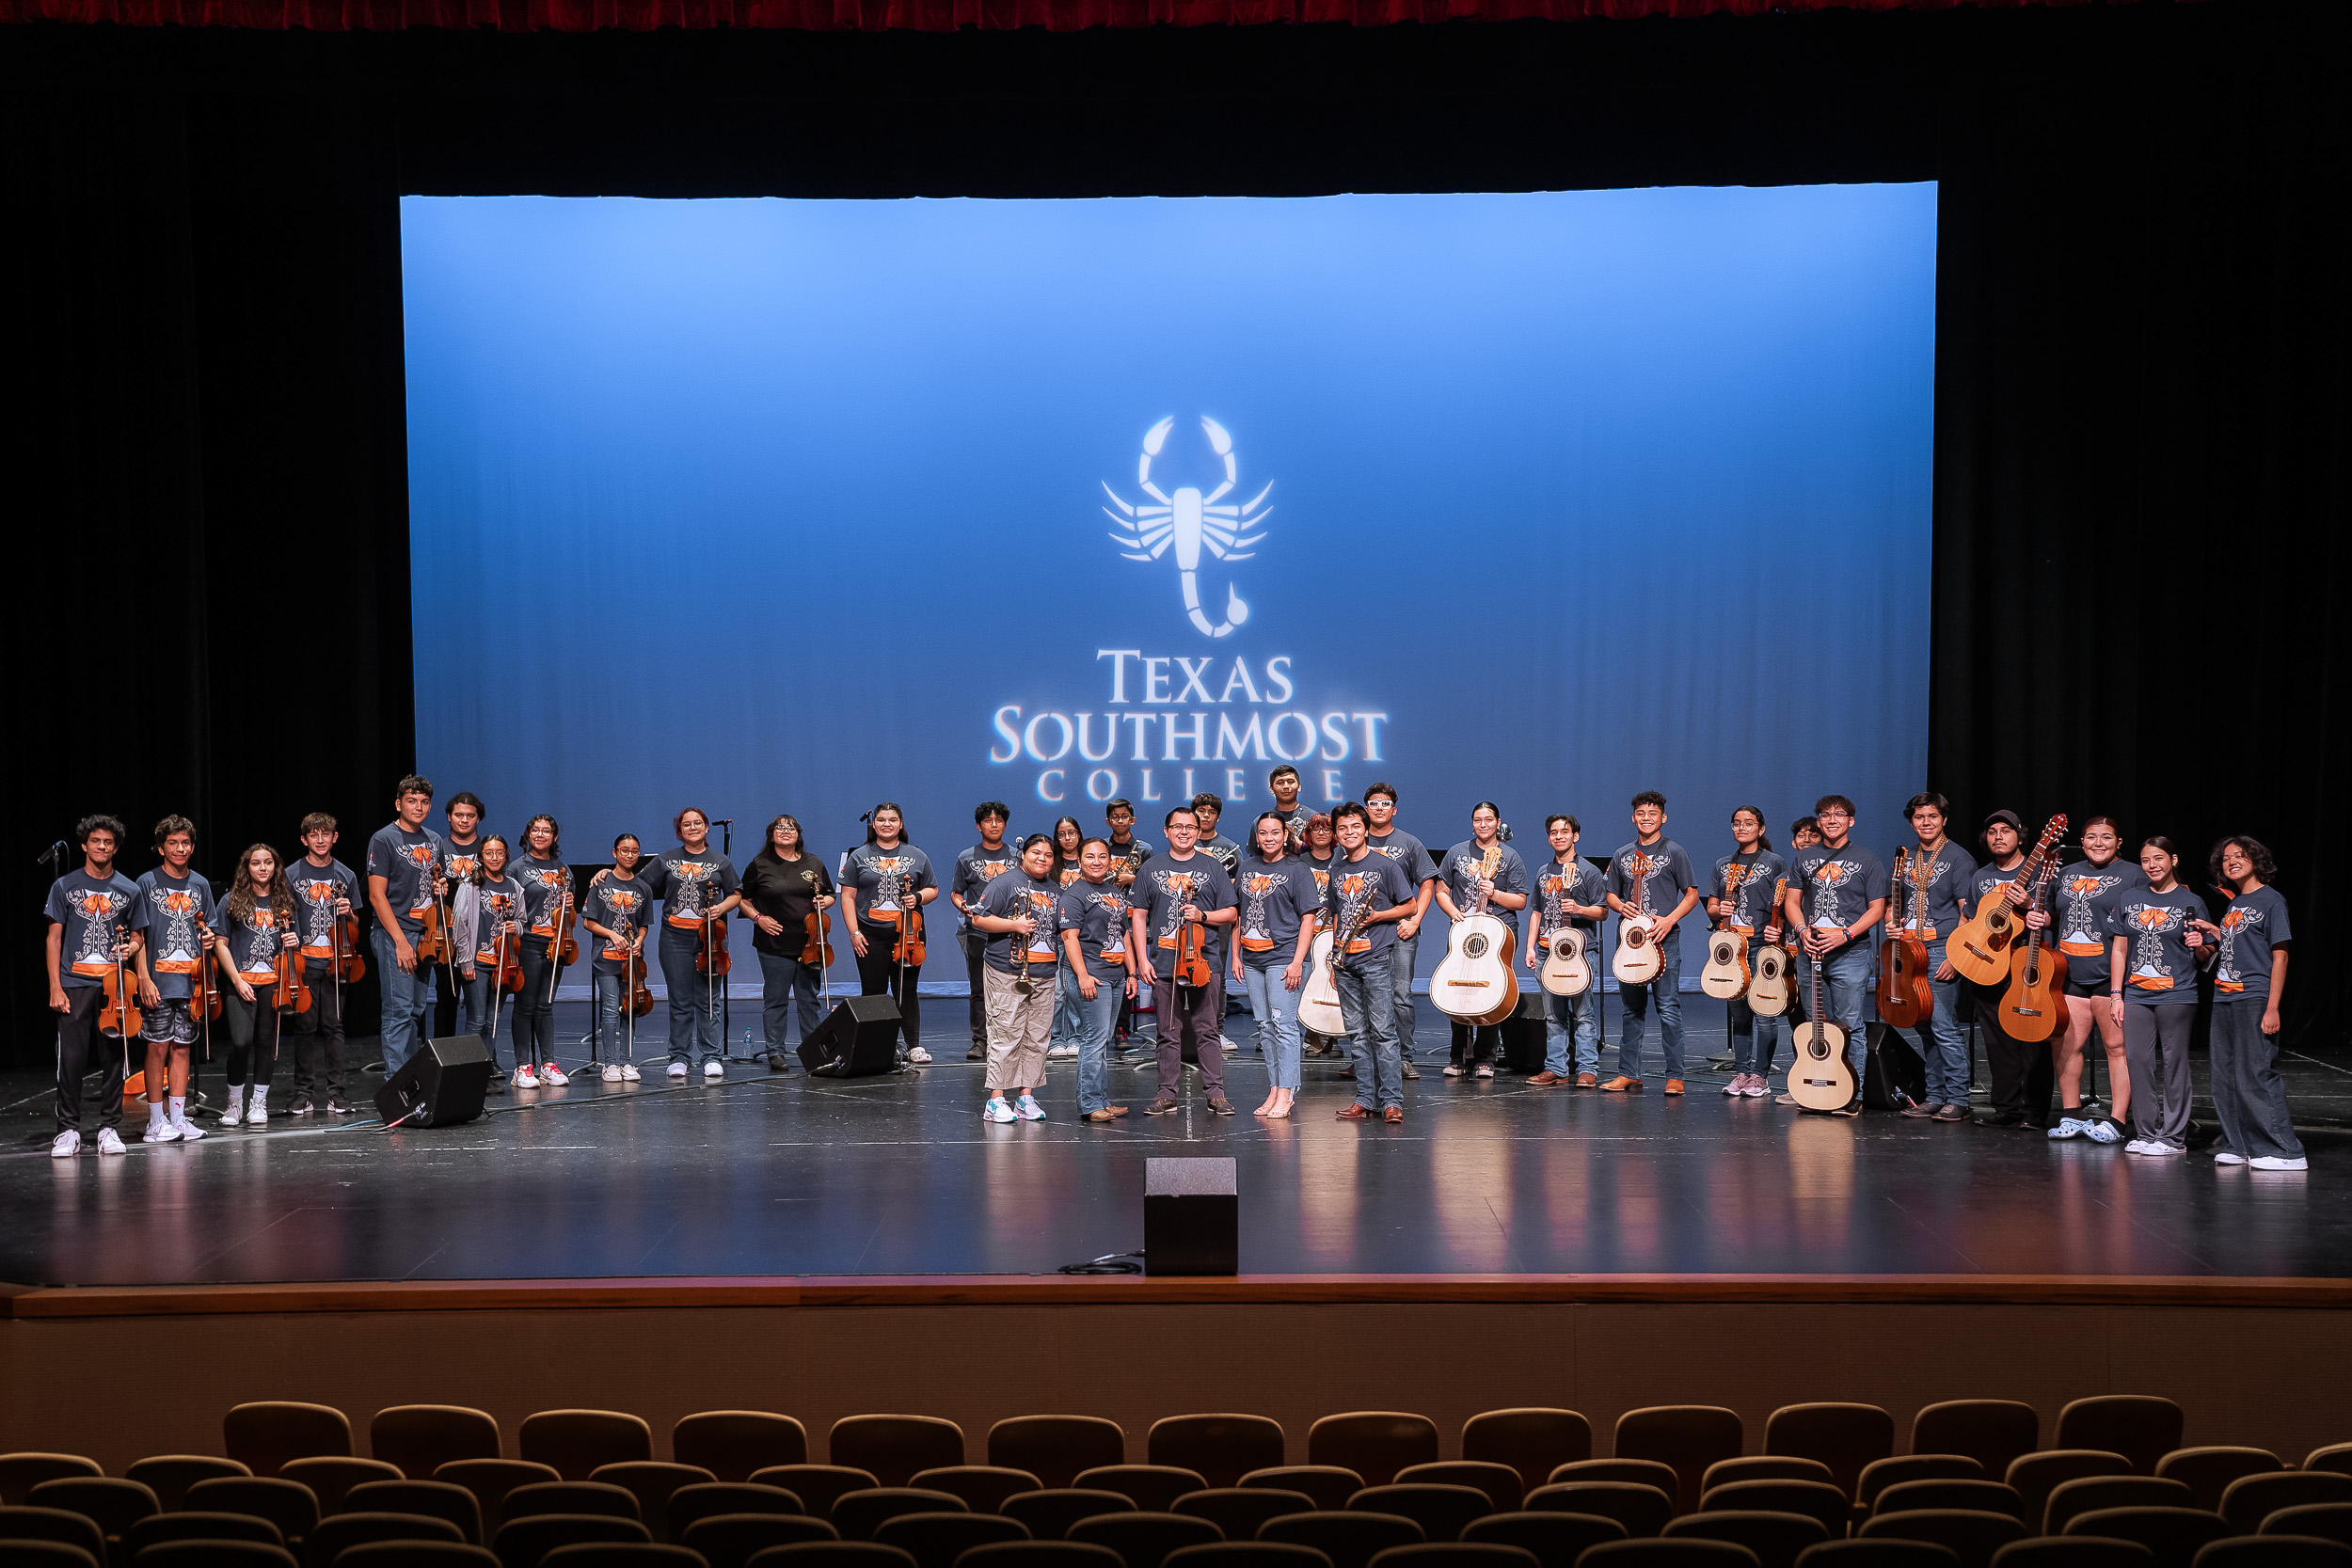 Texas Southmost College hosted the very first Mariachi Summer Camp in the Rio Grande Valley on July 10-12, 2023 at the TSC Performing Arts Center in Brownsville, Texas.